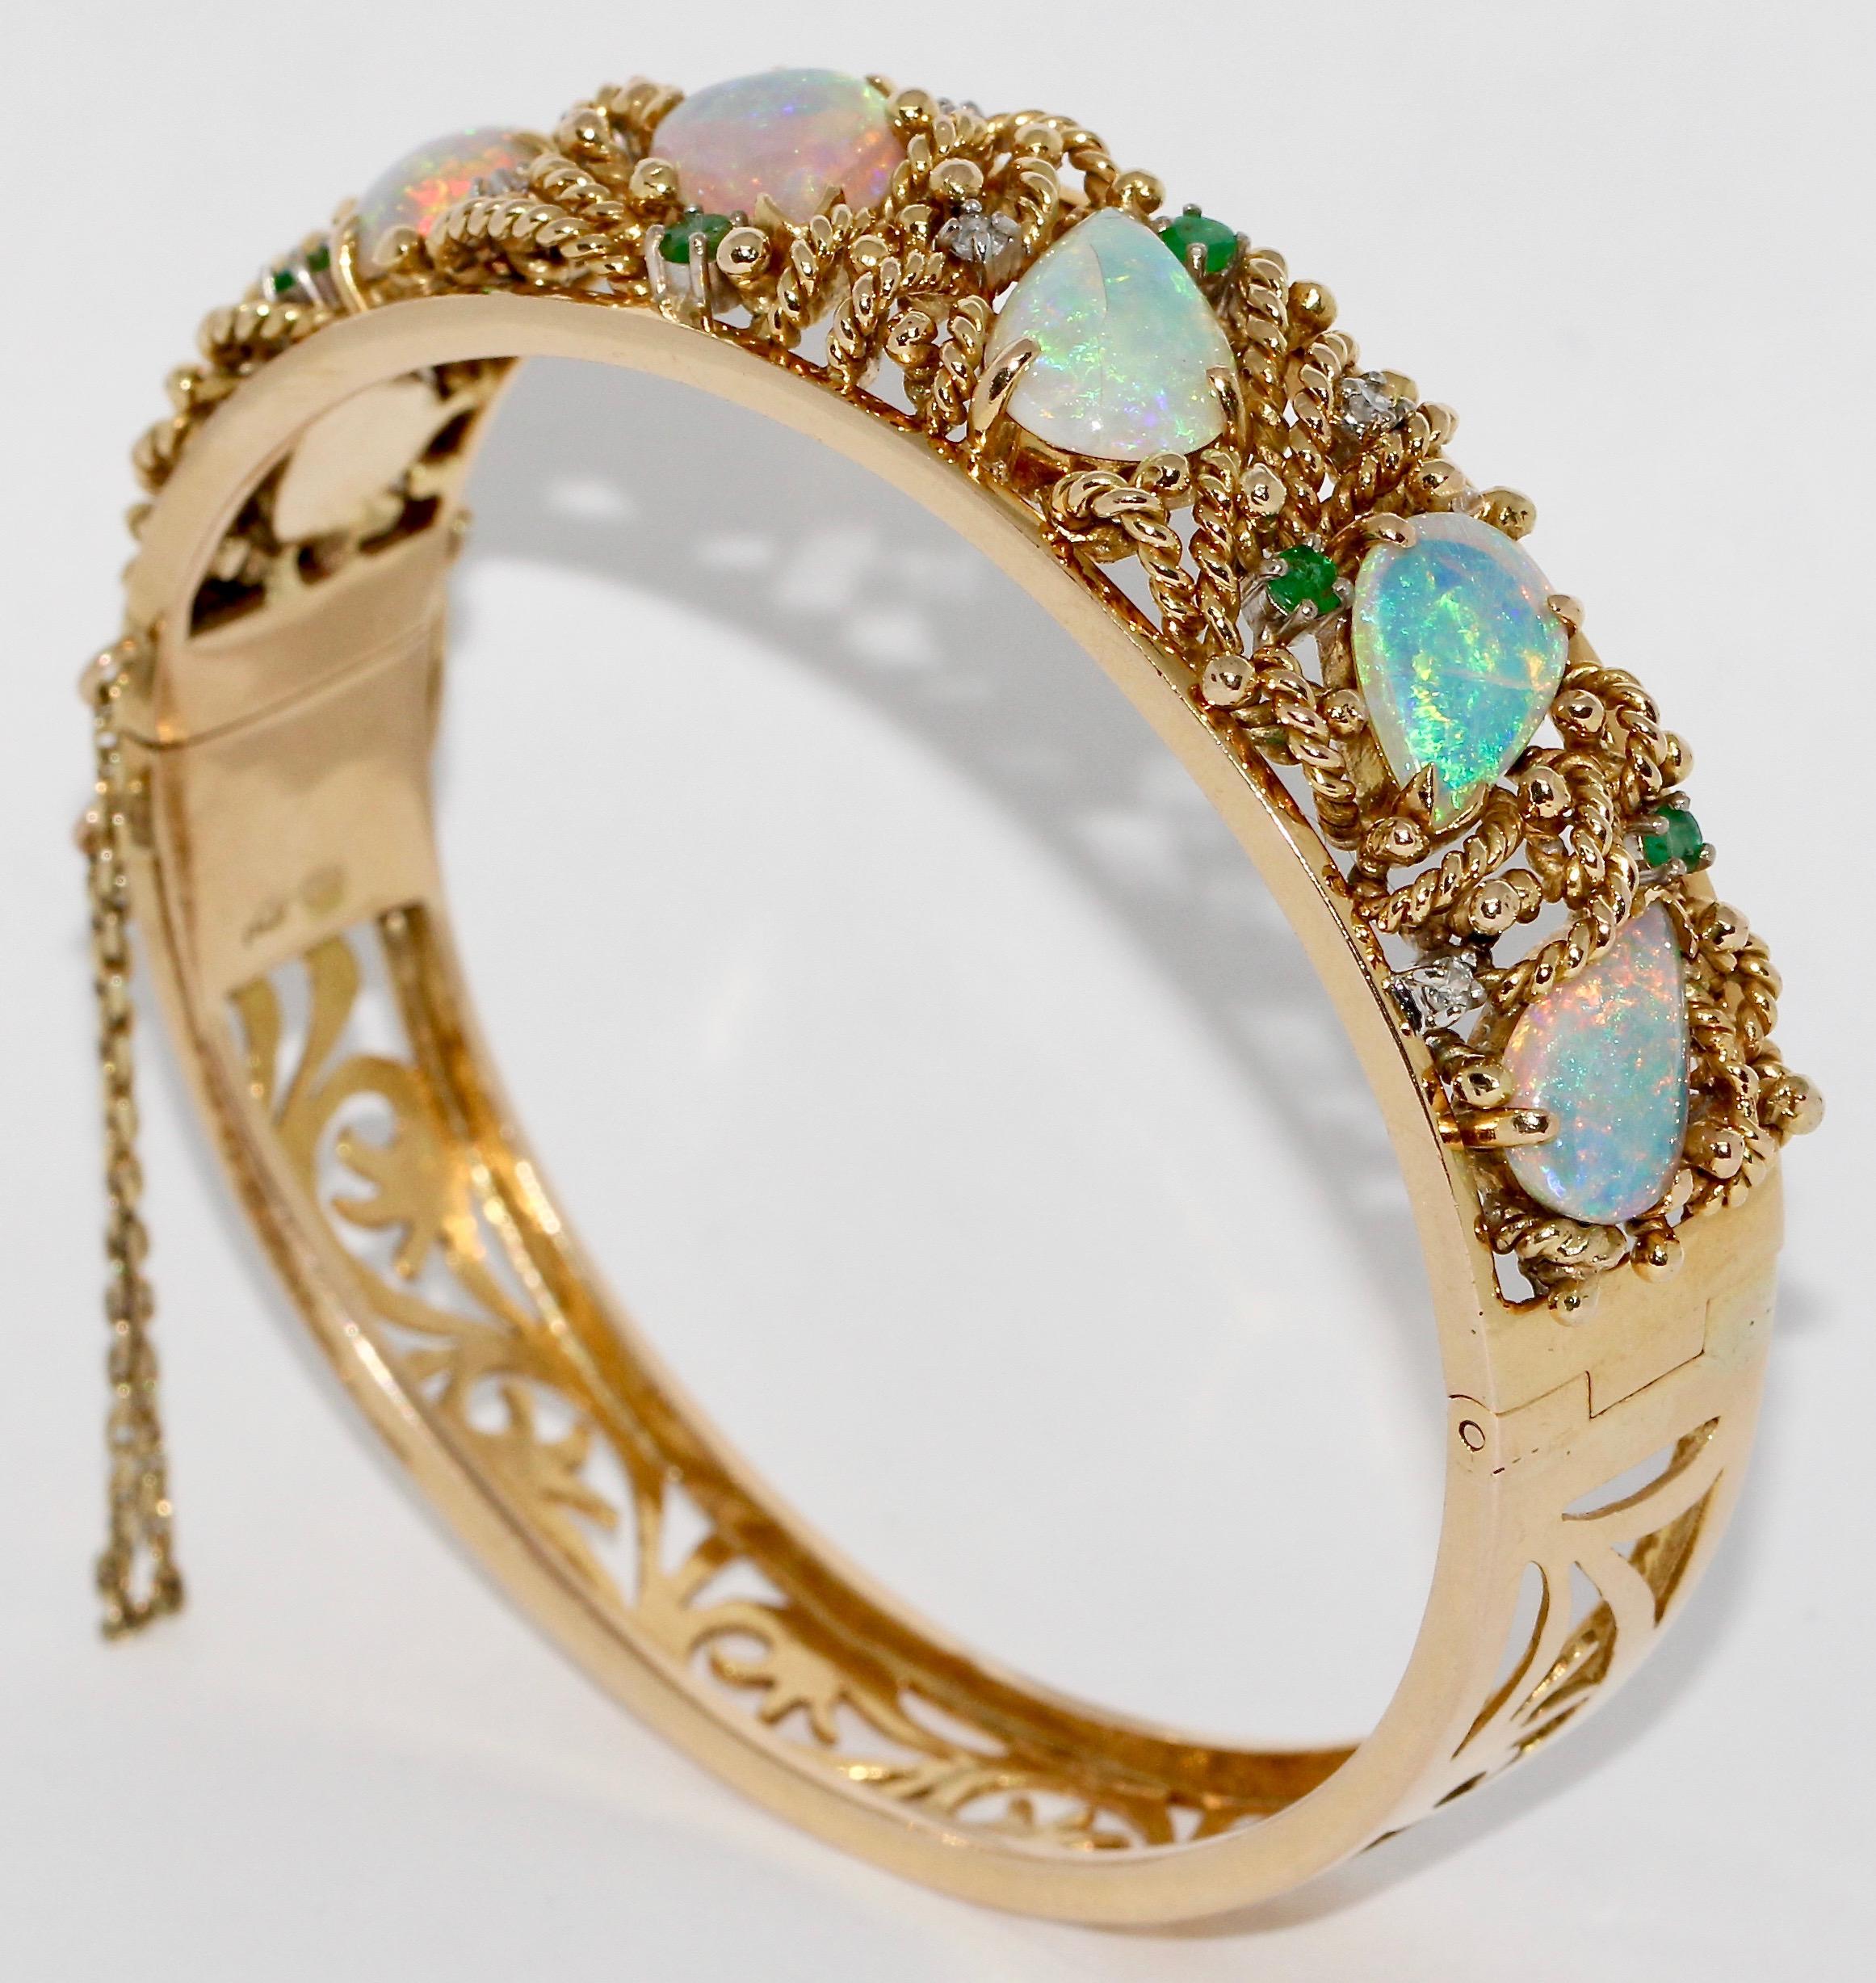 14 Karat Gold Bangle, Bracelet, with Opals, Diamonds and Emeralds.

The six natural full opals are in drop-cut.
Very fine goldsmith work.